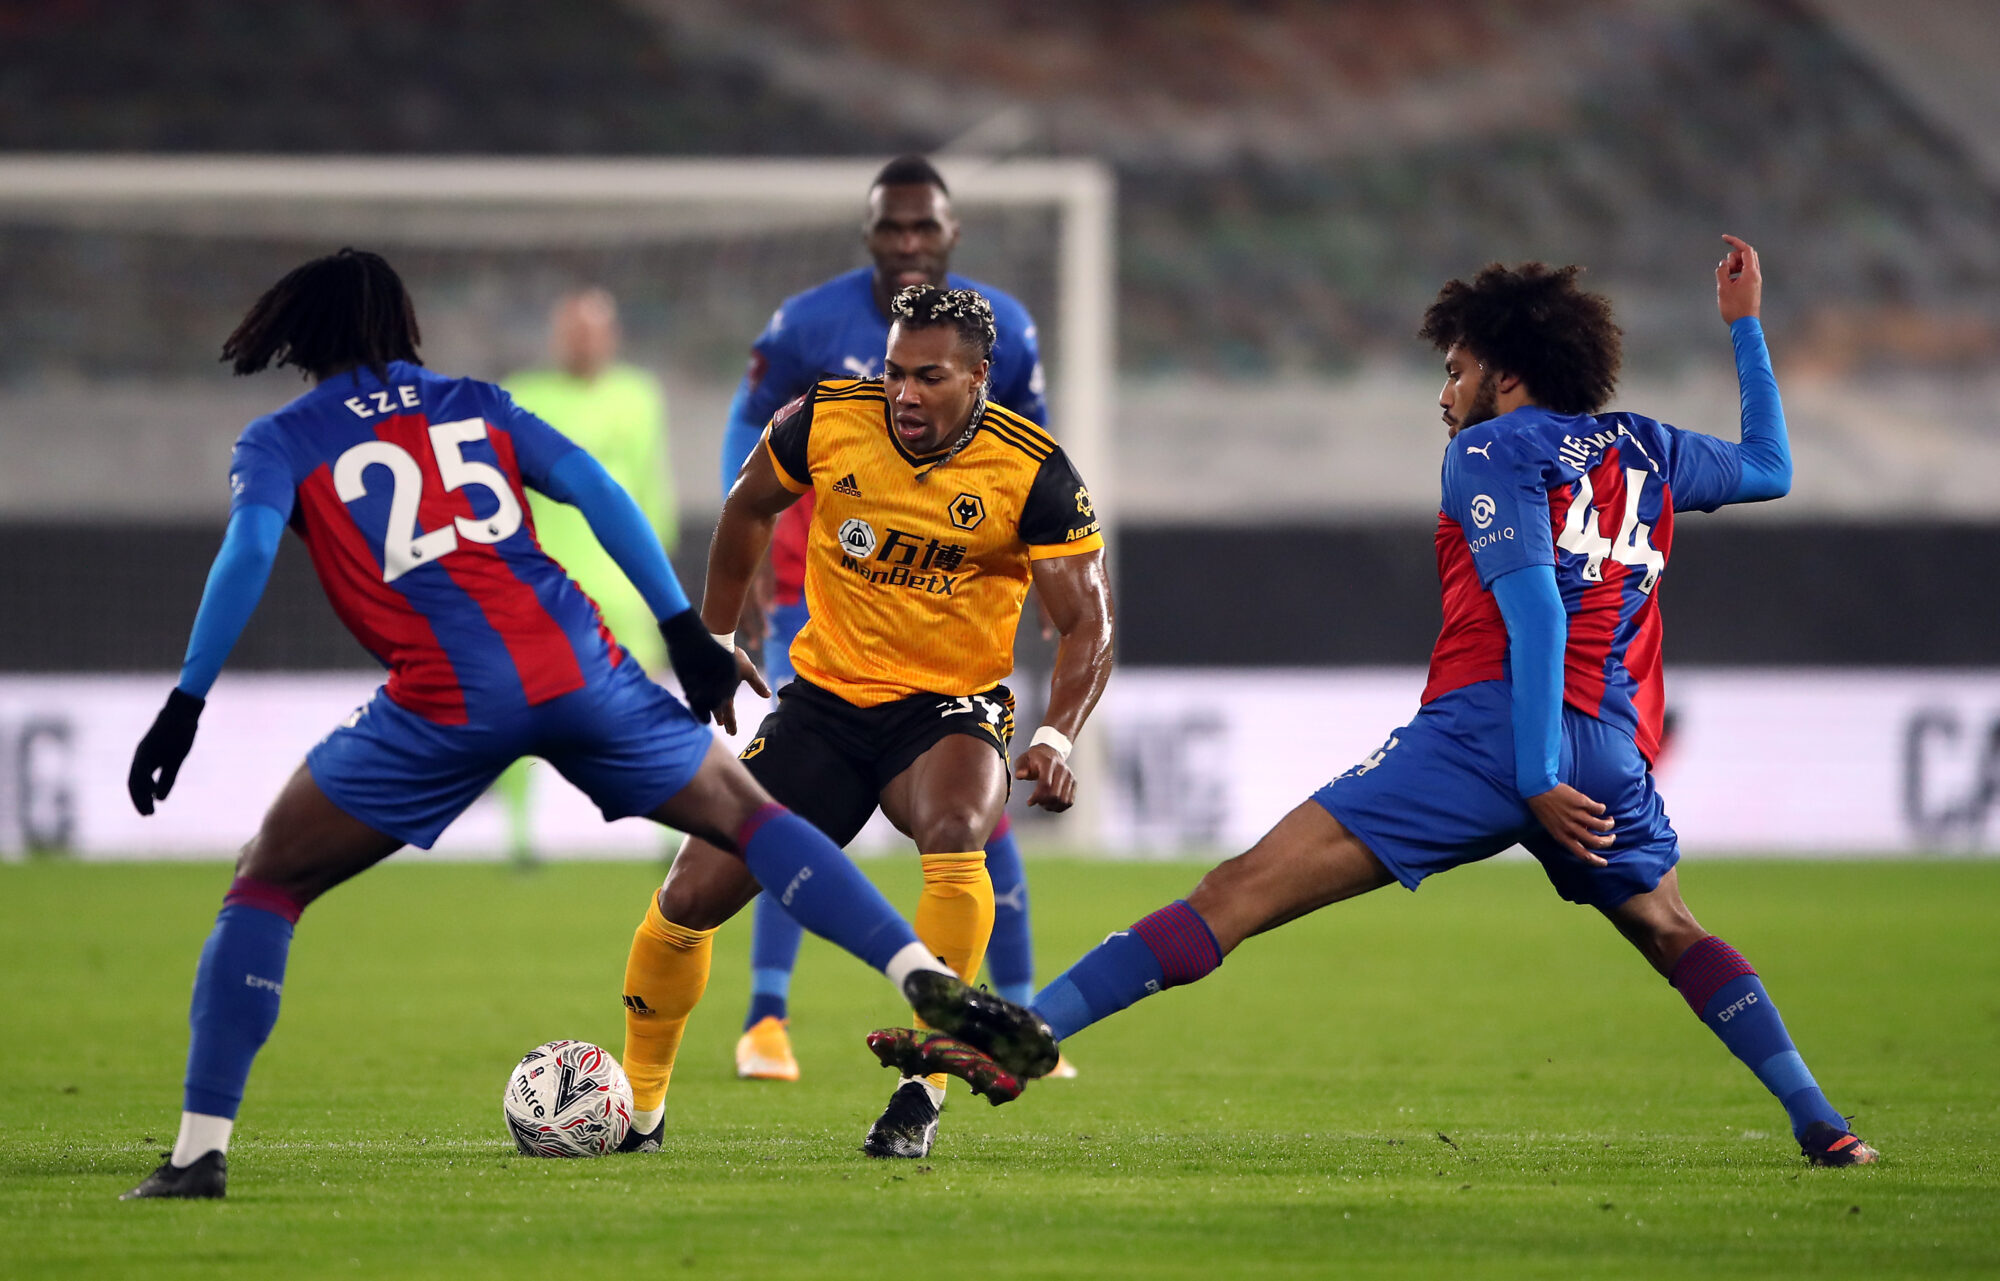 soi keo tai xiu (over/under) crystal palace vs wolves